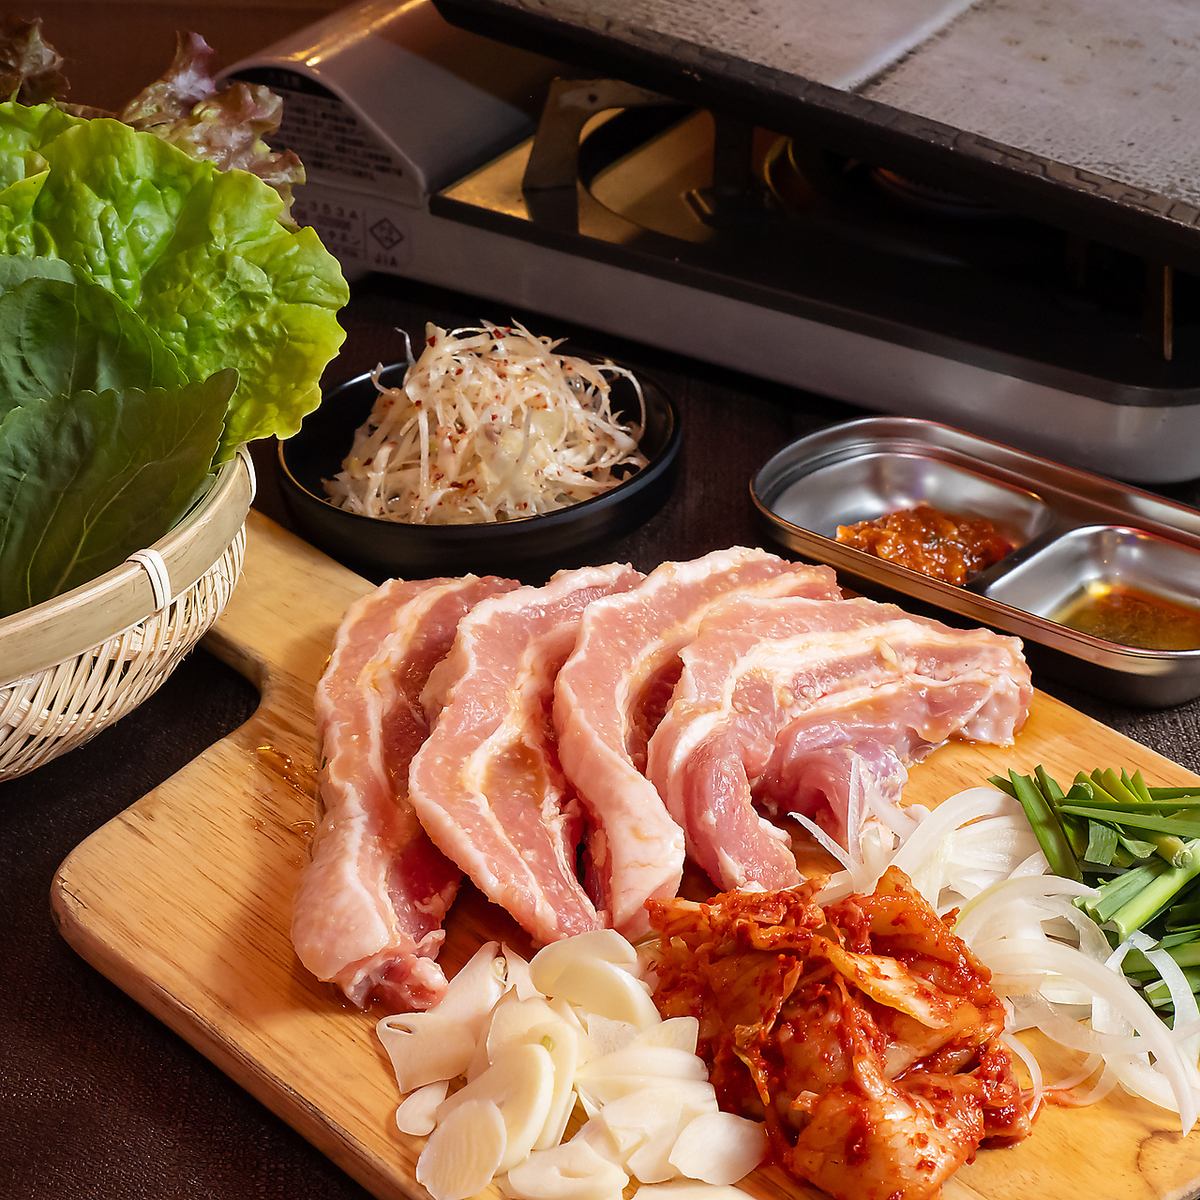 The most popular samgyeopsal is made with delicious domestic pork◎